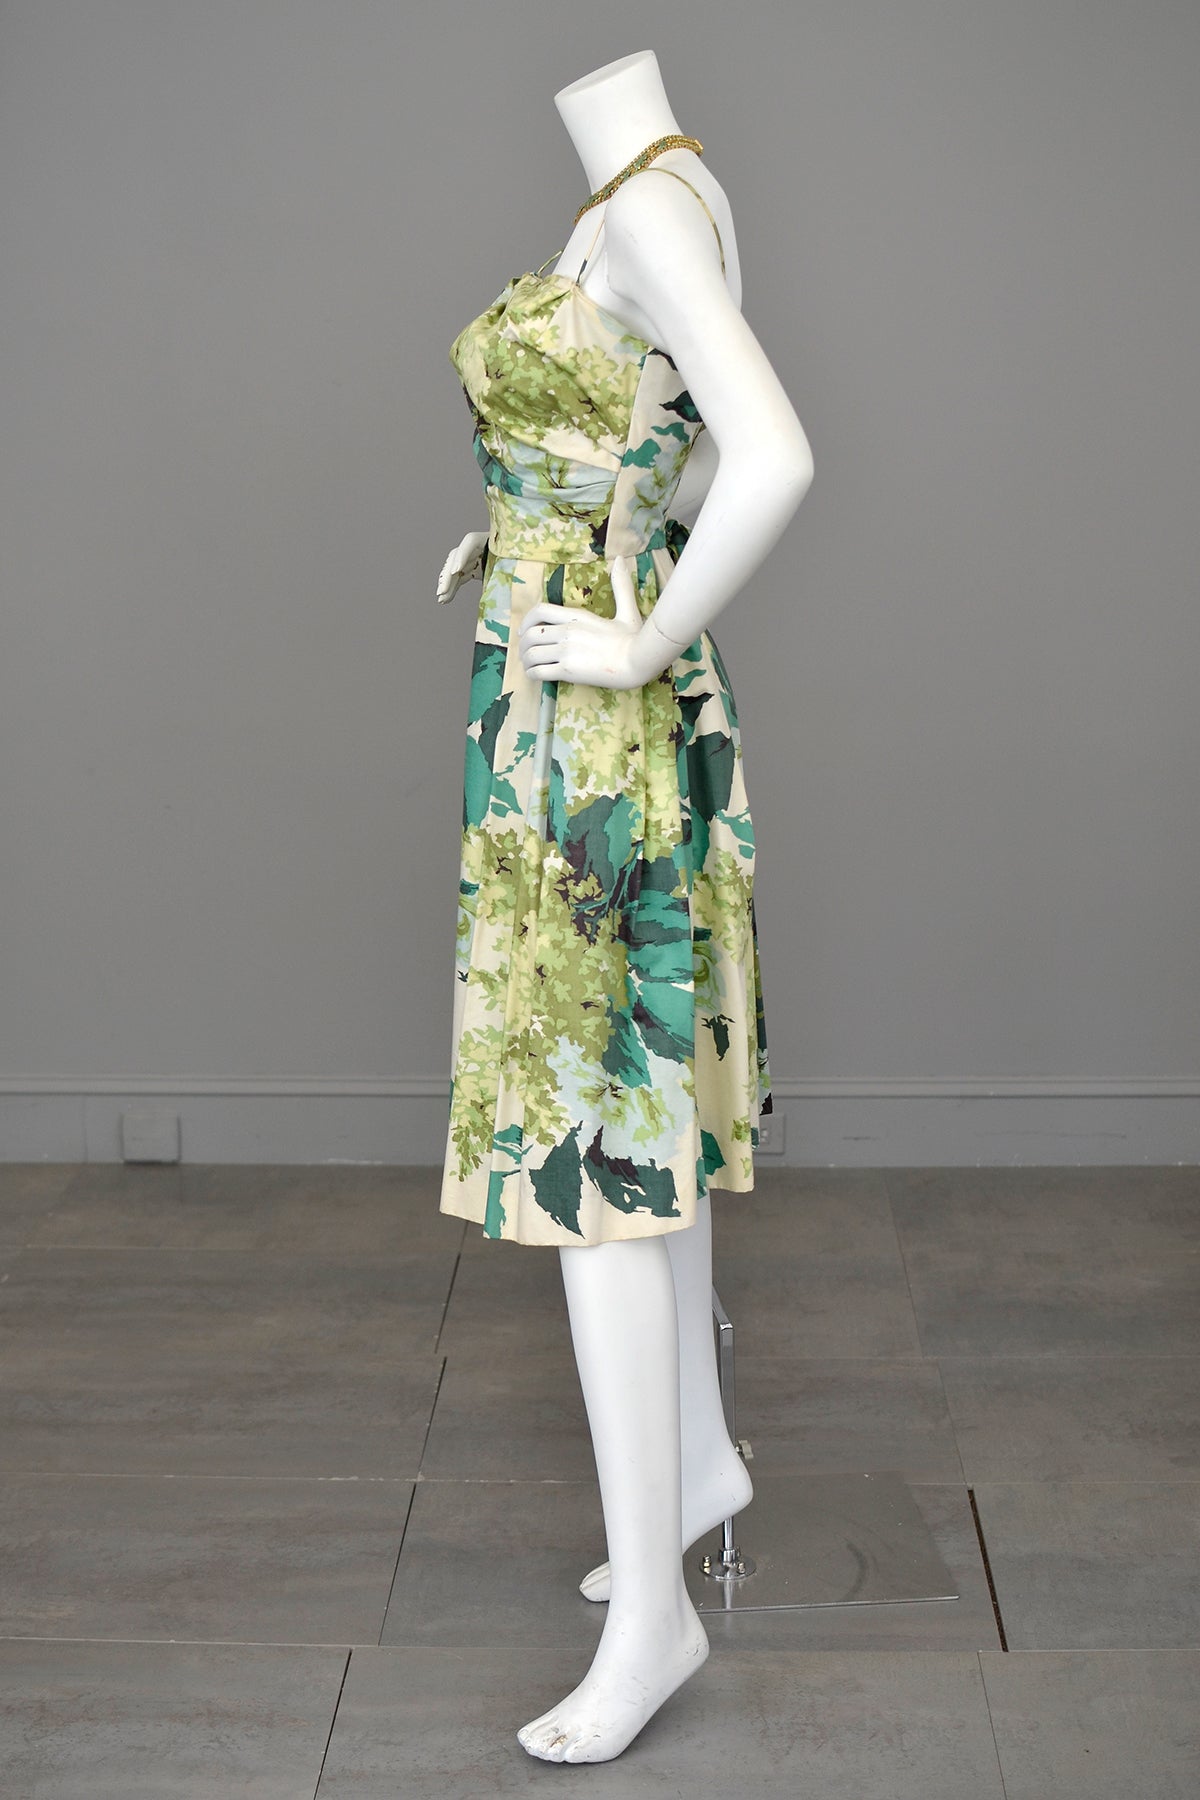 1950s 60s Water Color Hydrangea Floral Print Party Dress with Draped Bodice